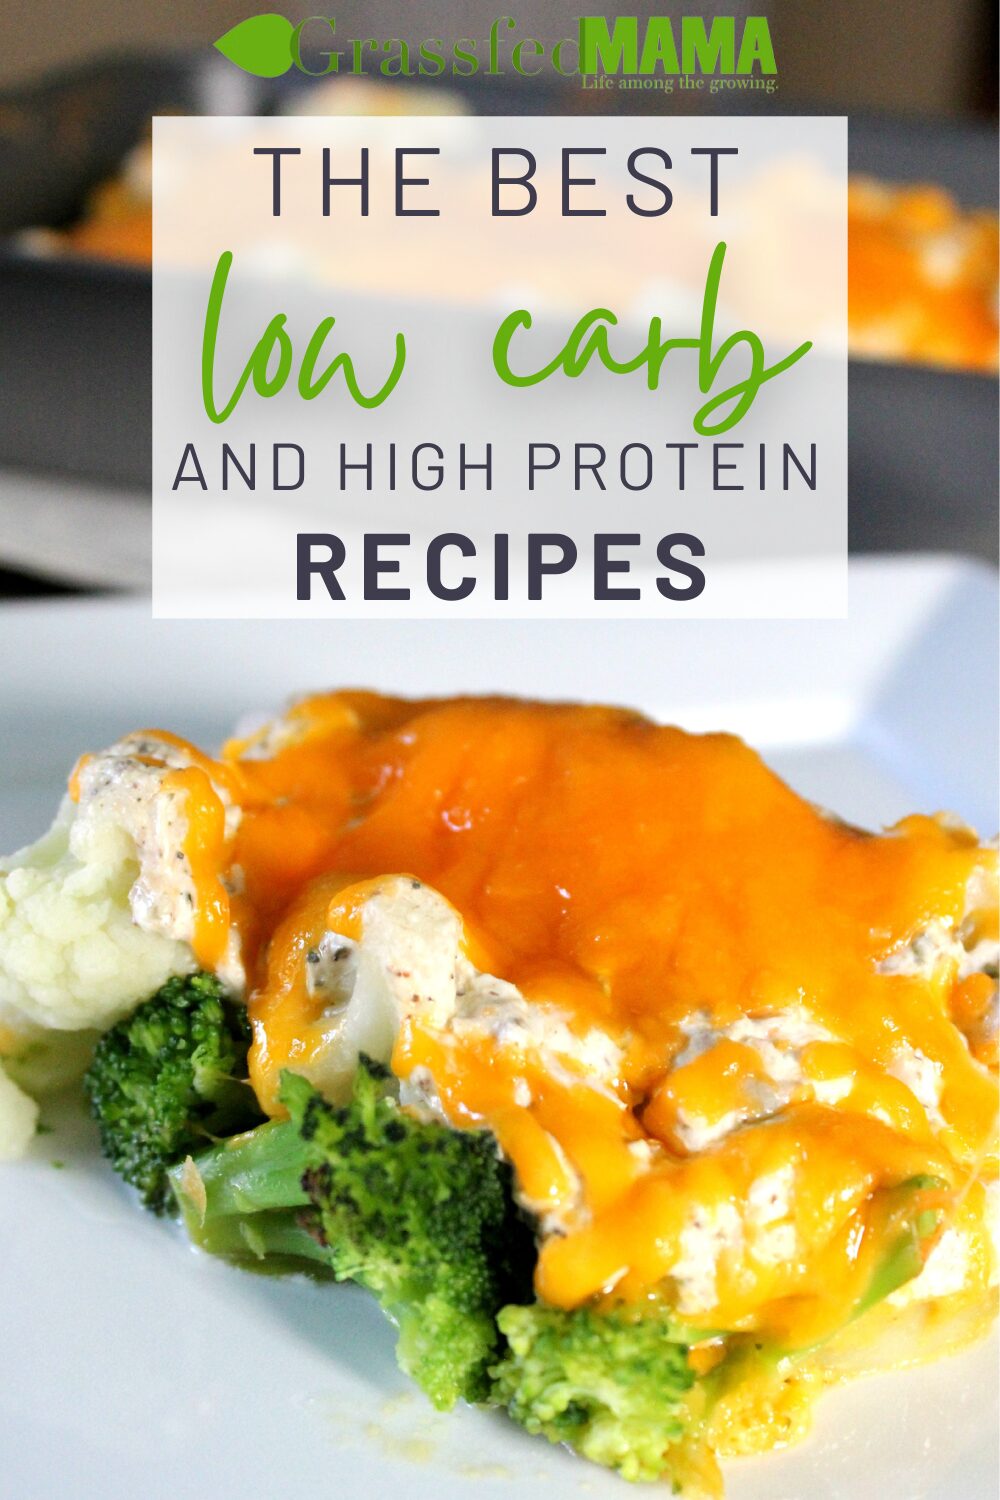 The Best Low Carb and High Protein Recipes